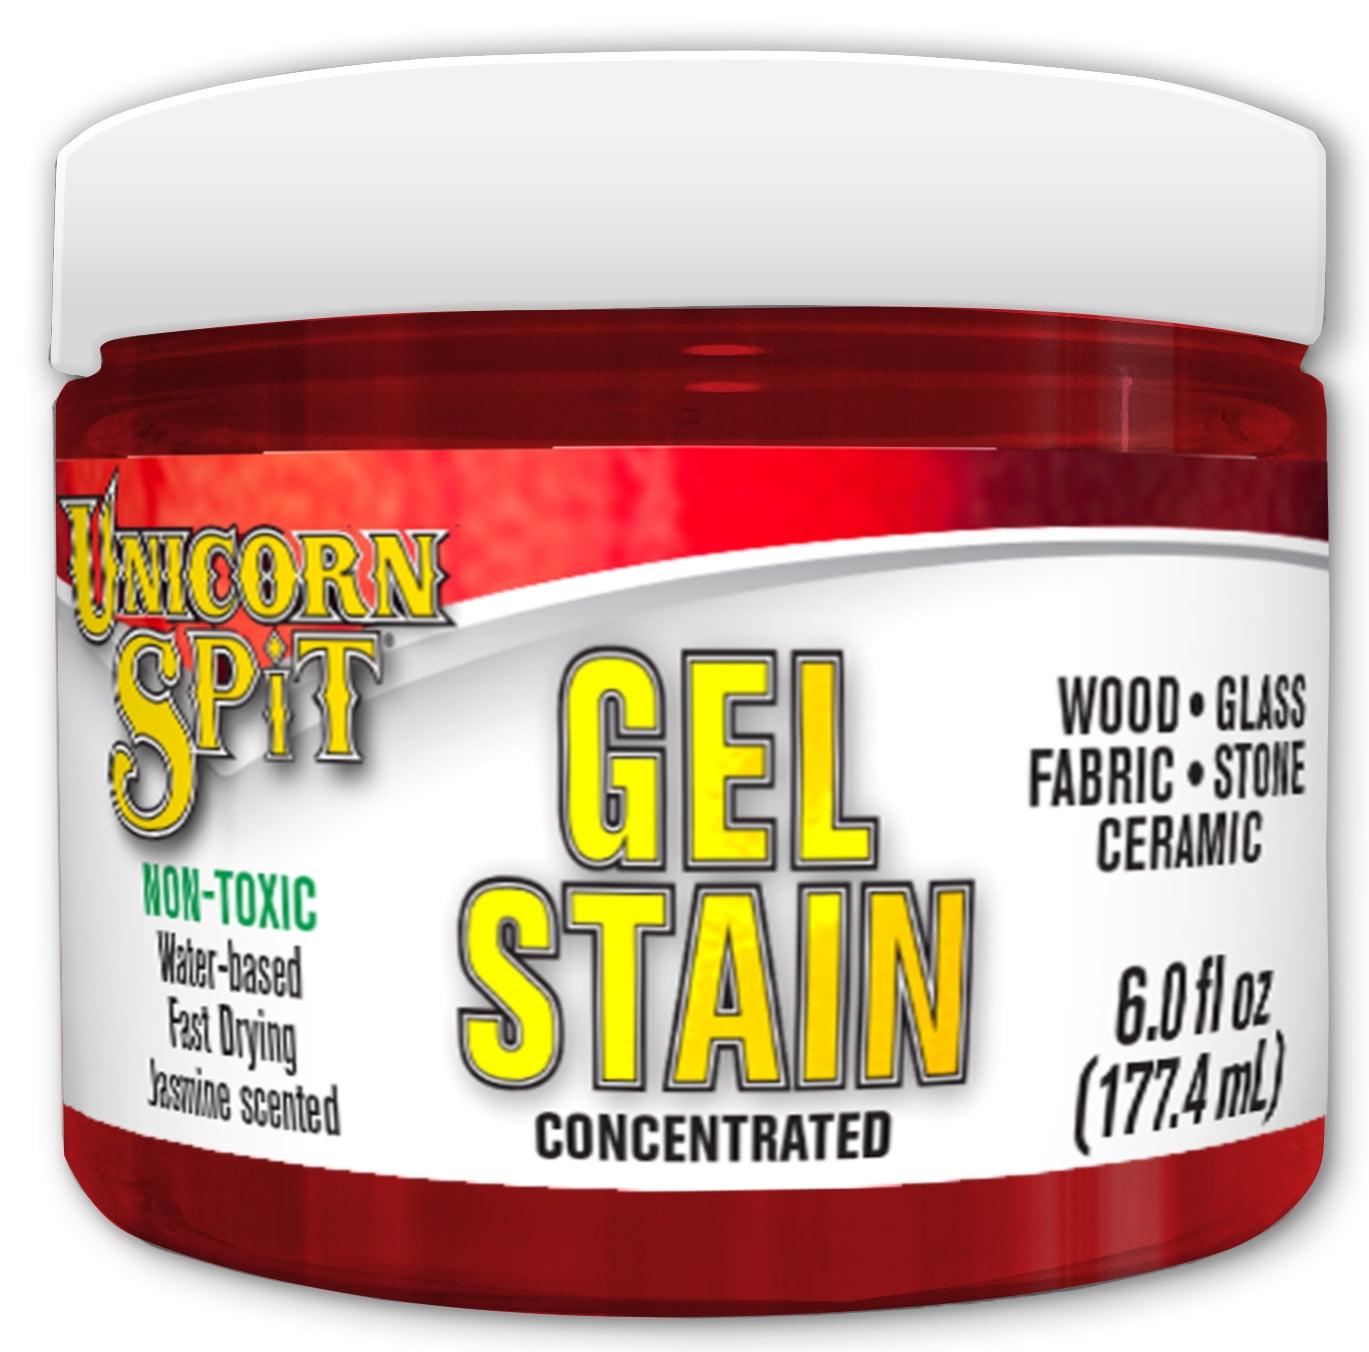 Unicorn Spit Concentrated Gel Stain and Glaze 8.0oz Sparkling Collection  6-Pack